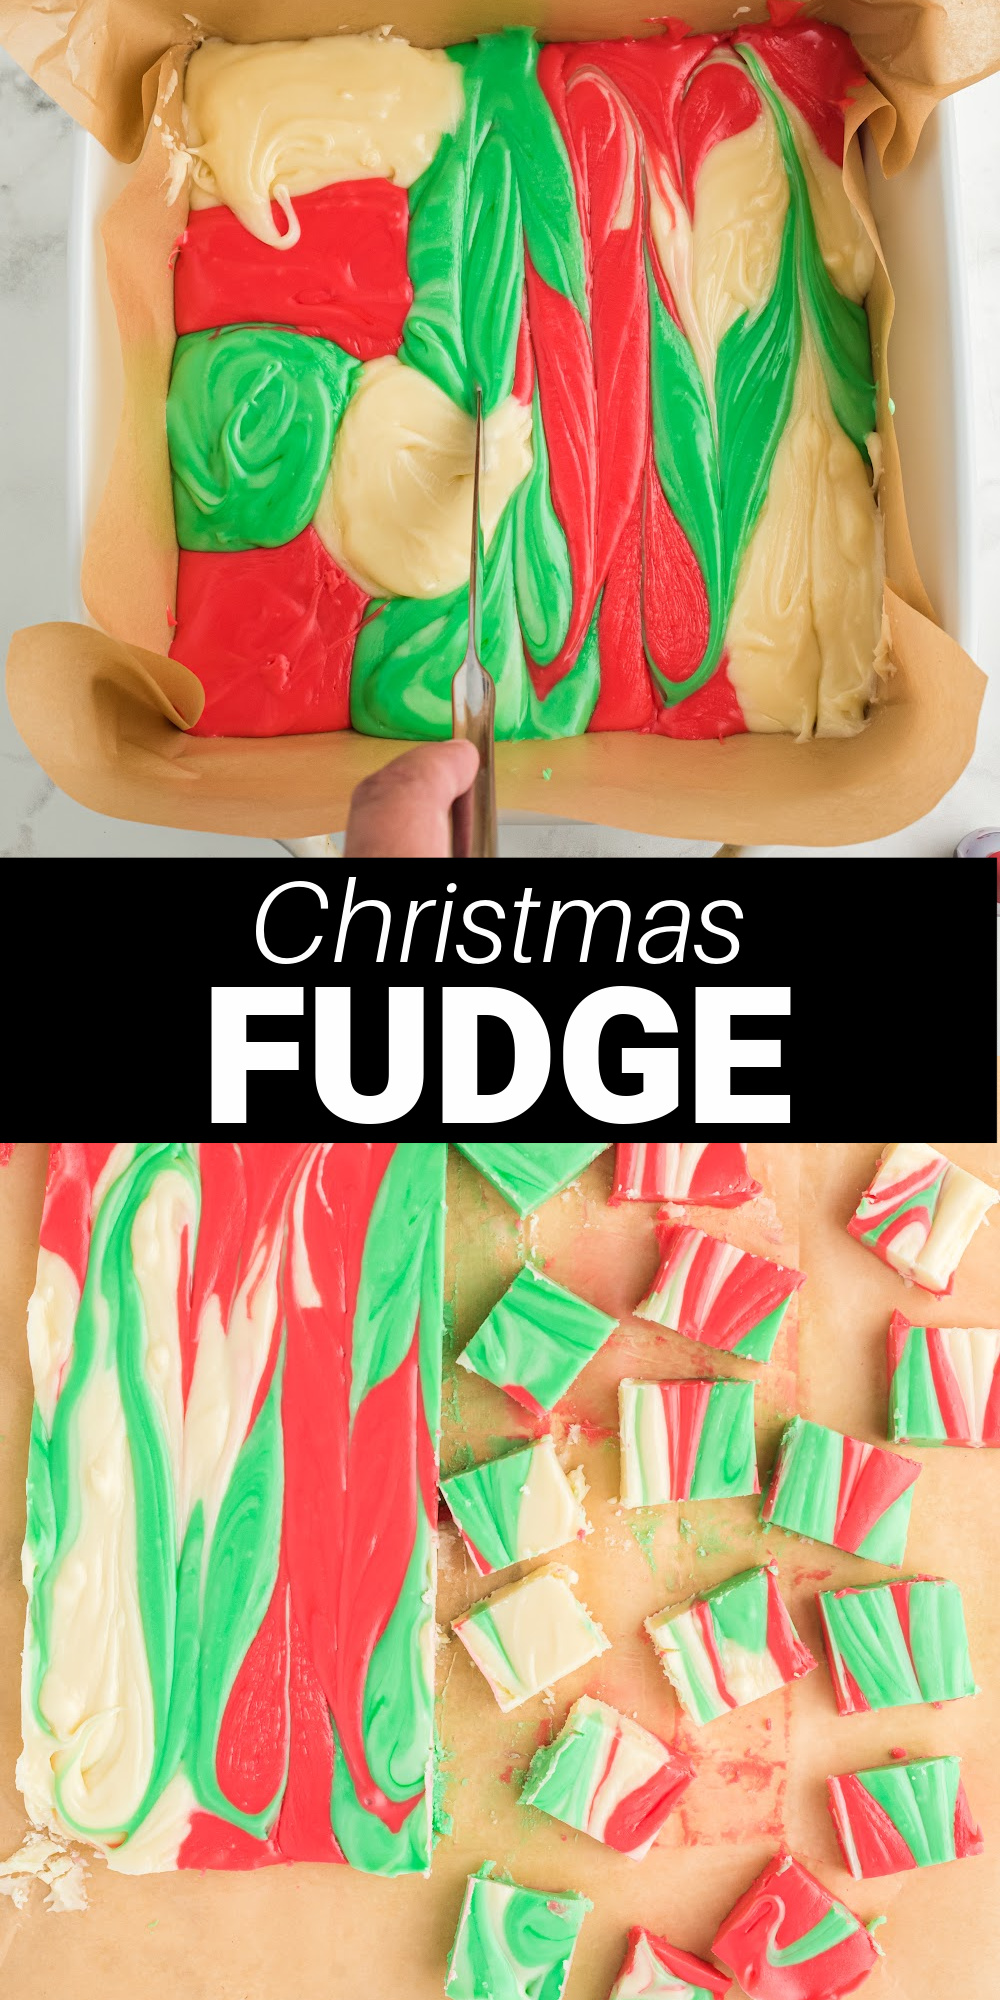 This 3-ingredient Christmas fudge is an easy and colorful sweet treat for the holiday season. This white chocolate fudge is made with vanilla frosting with makes is extra creamy. It's perfect for a holiday party or serve as a simple dessert.